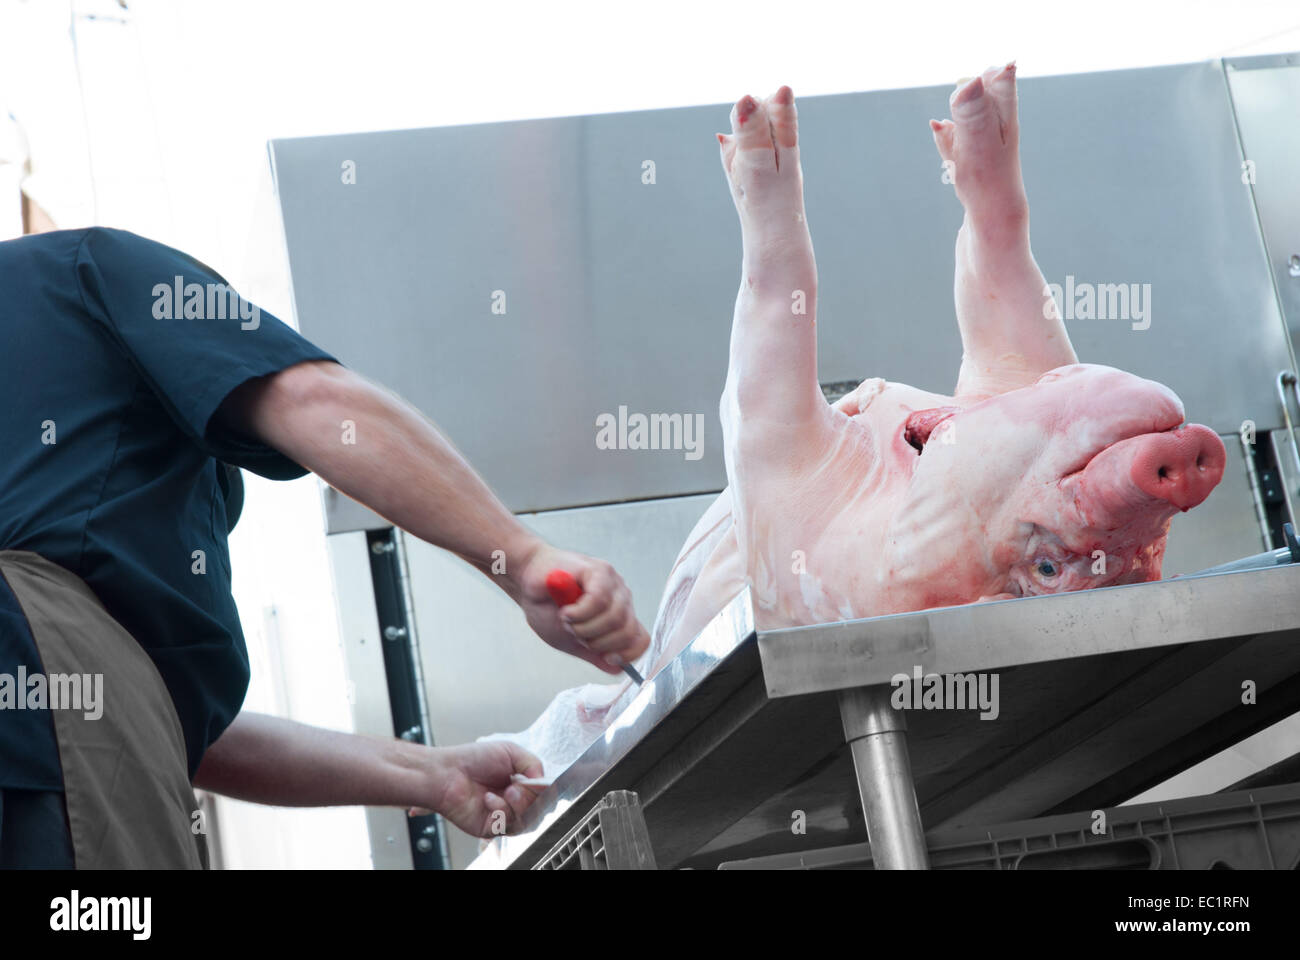 A large pig being prepared for cooking in a smoker or outdoor oven. Stock Photo